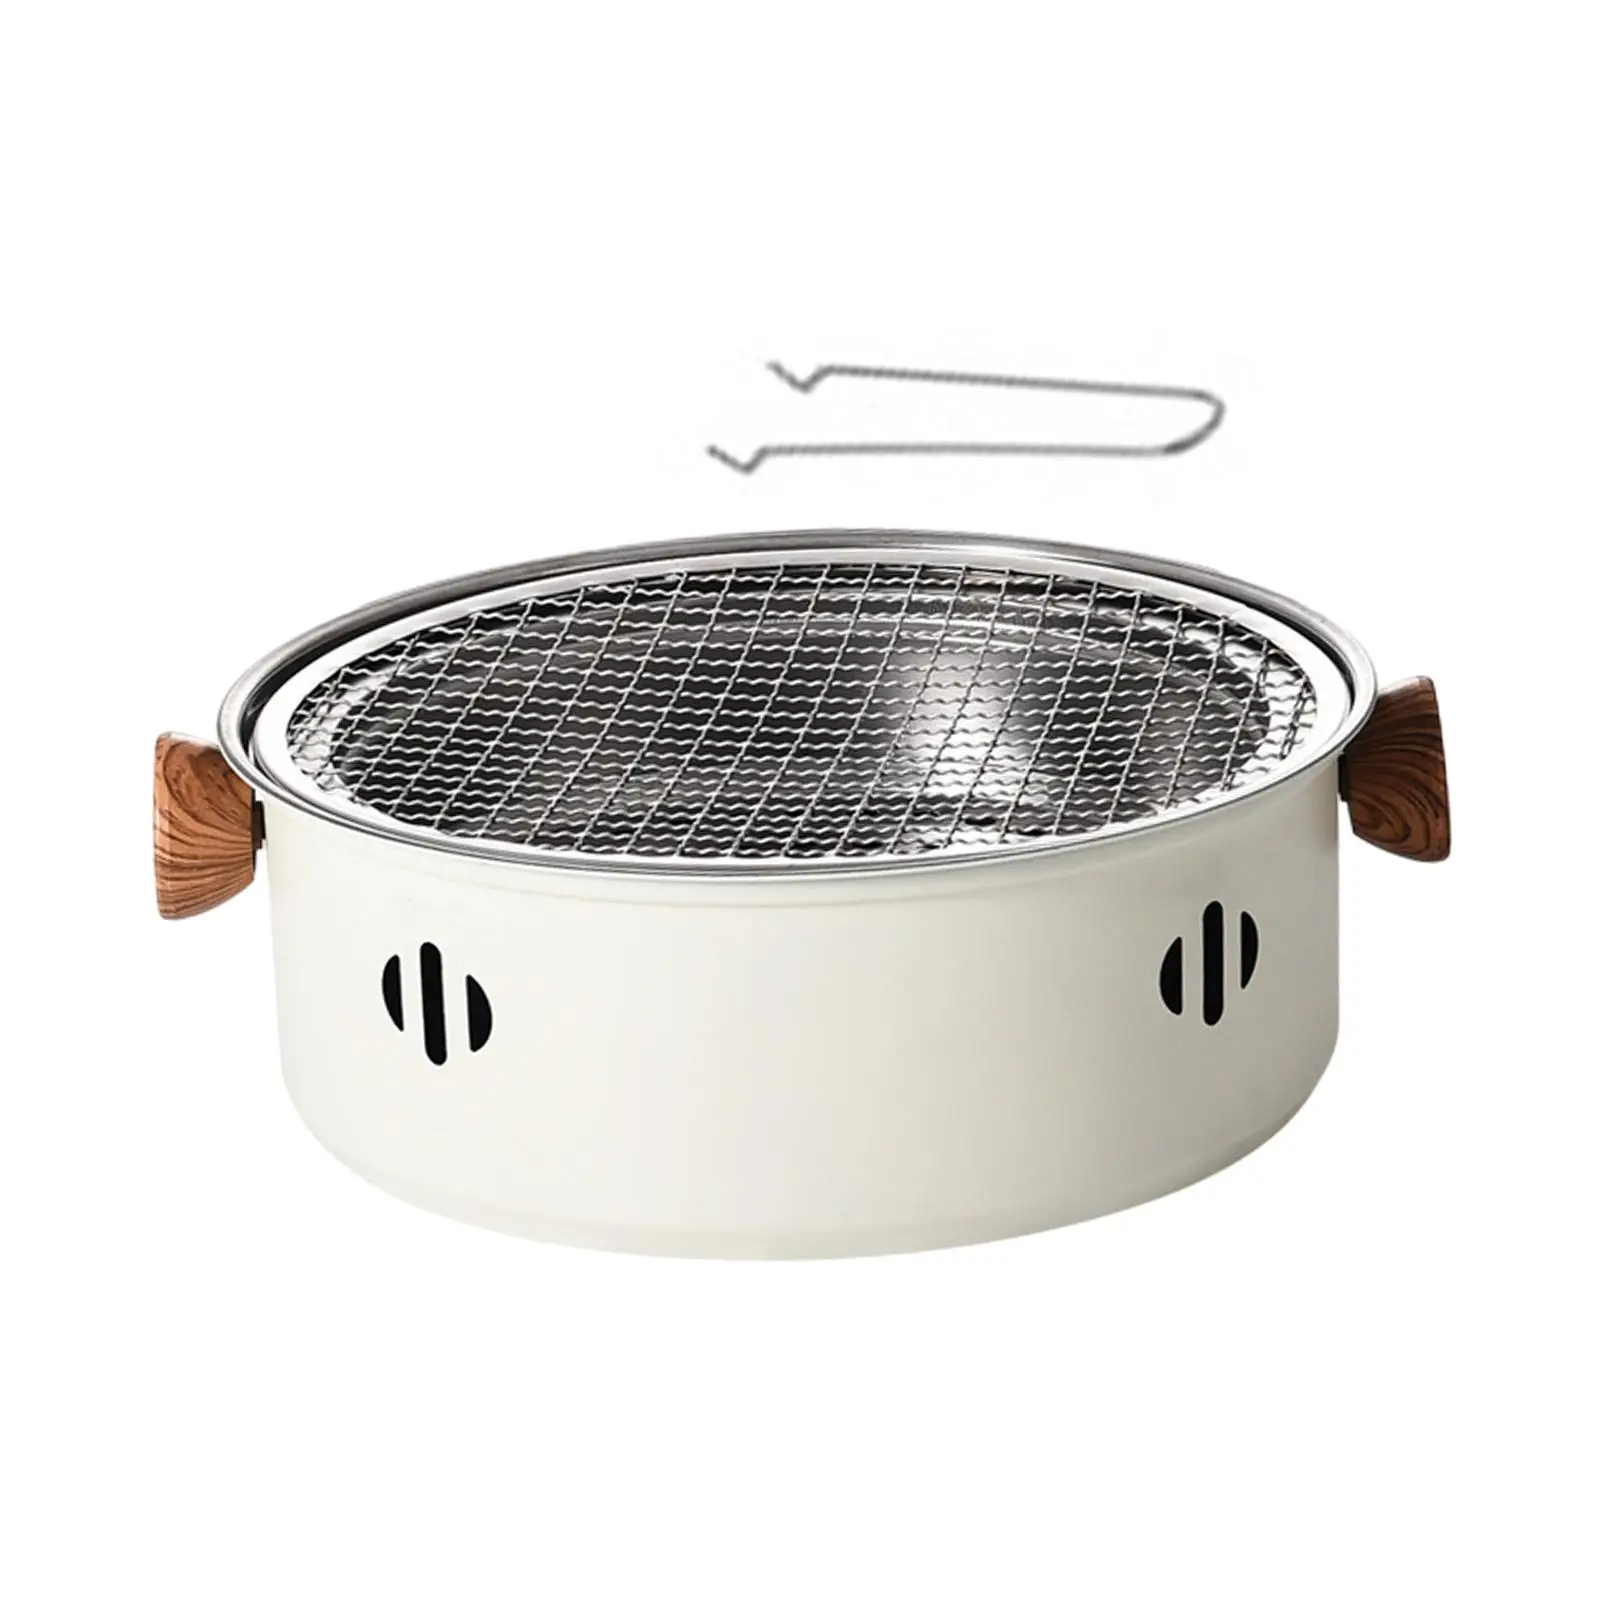 Charcoal Stove Portable Stainless Steel with Grill Grid Teapot Warmer Outdoor Grill Stove for Picnic Household Beach Cooking